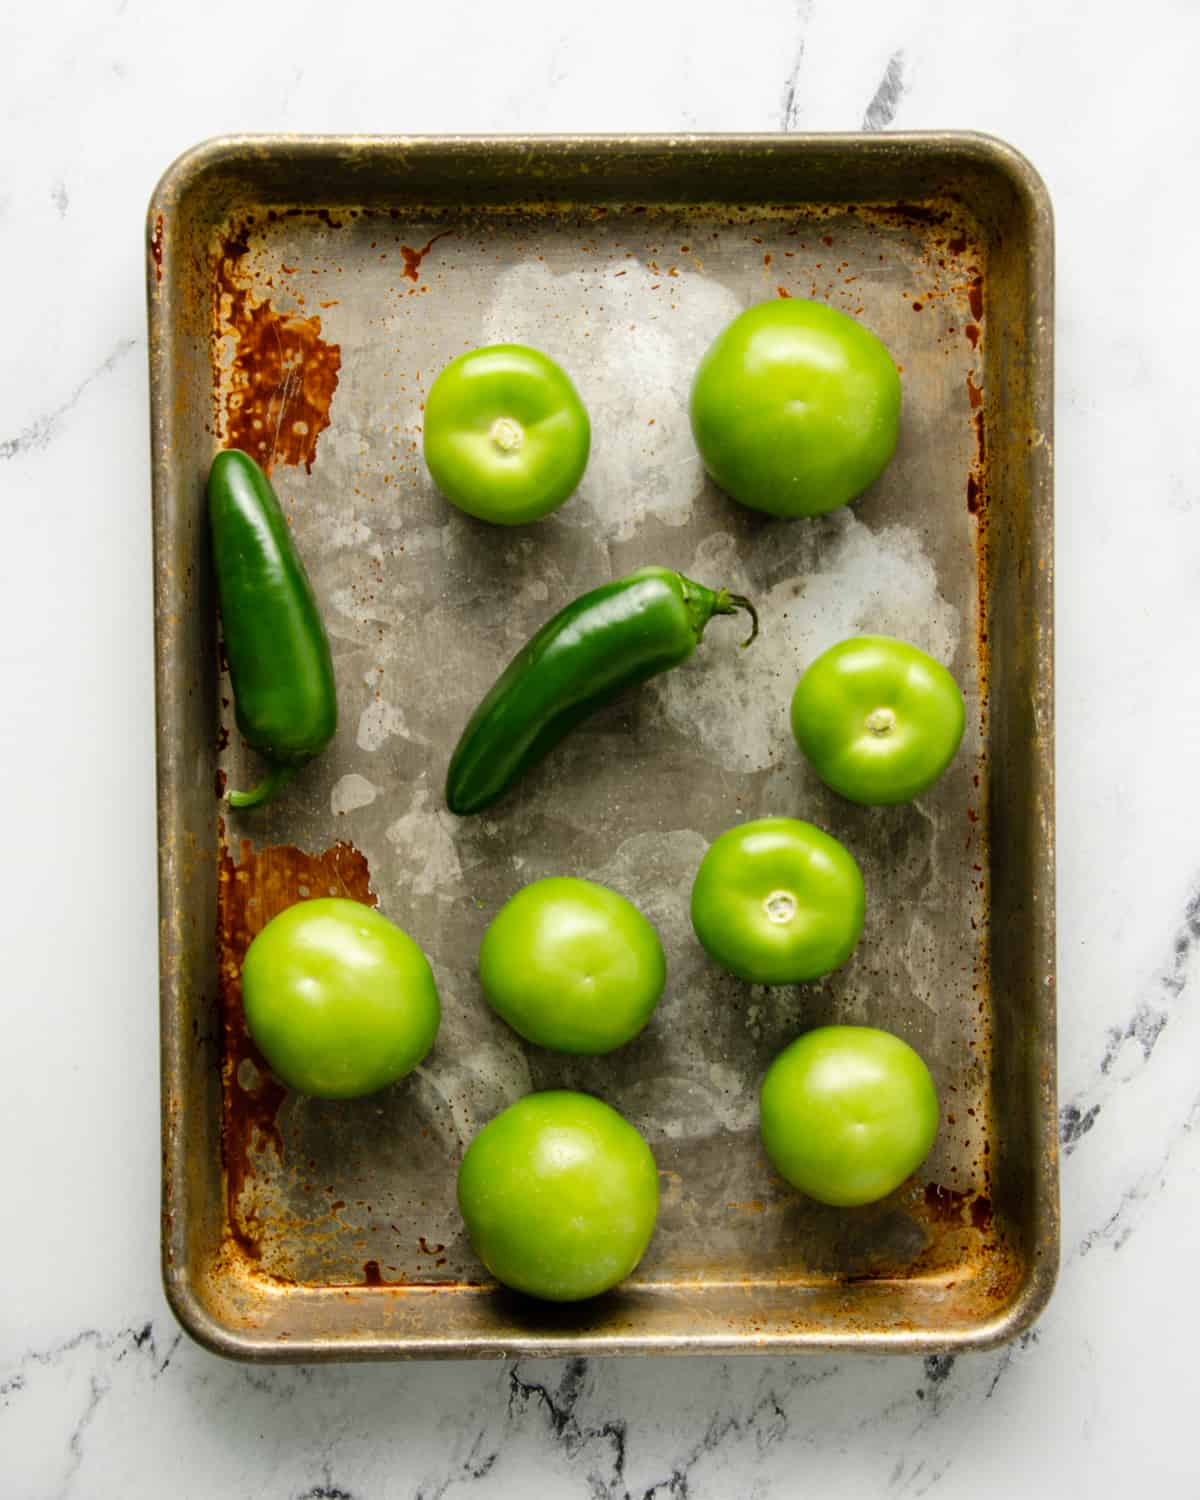 Tomatillos and peppers on a baking sheet before roasting.